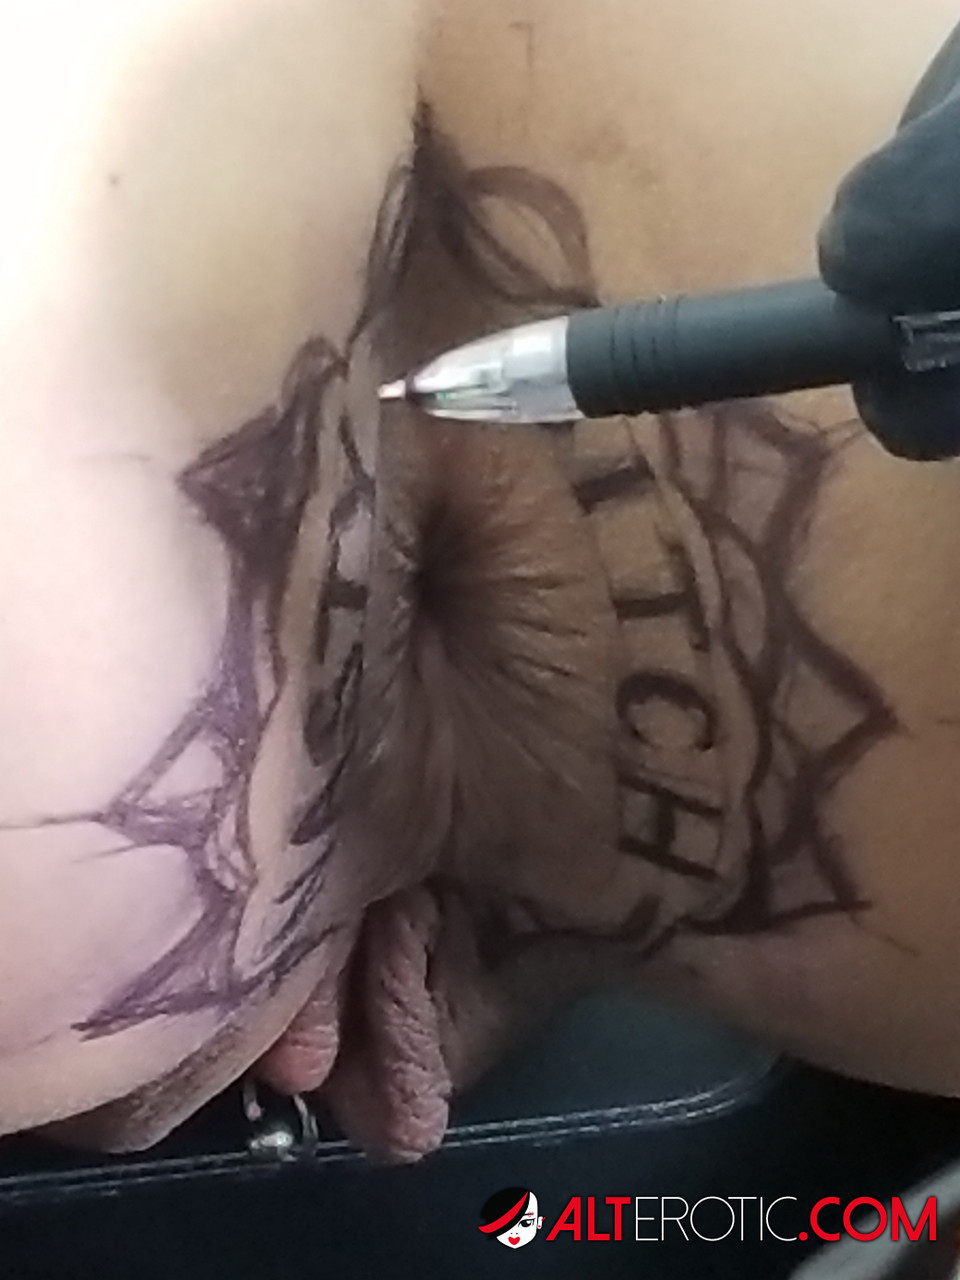 Latina chick Kitty Jaguar gets a butt tattoo before being fucked foto porno #424168451 | Alt Erotic Pics, Kitty Jaguar, Tattoo, porno mobile